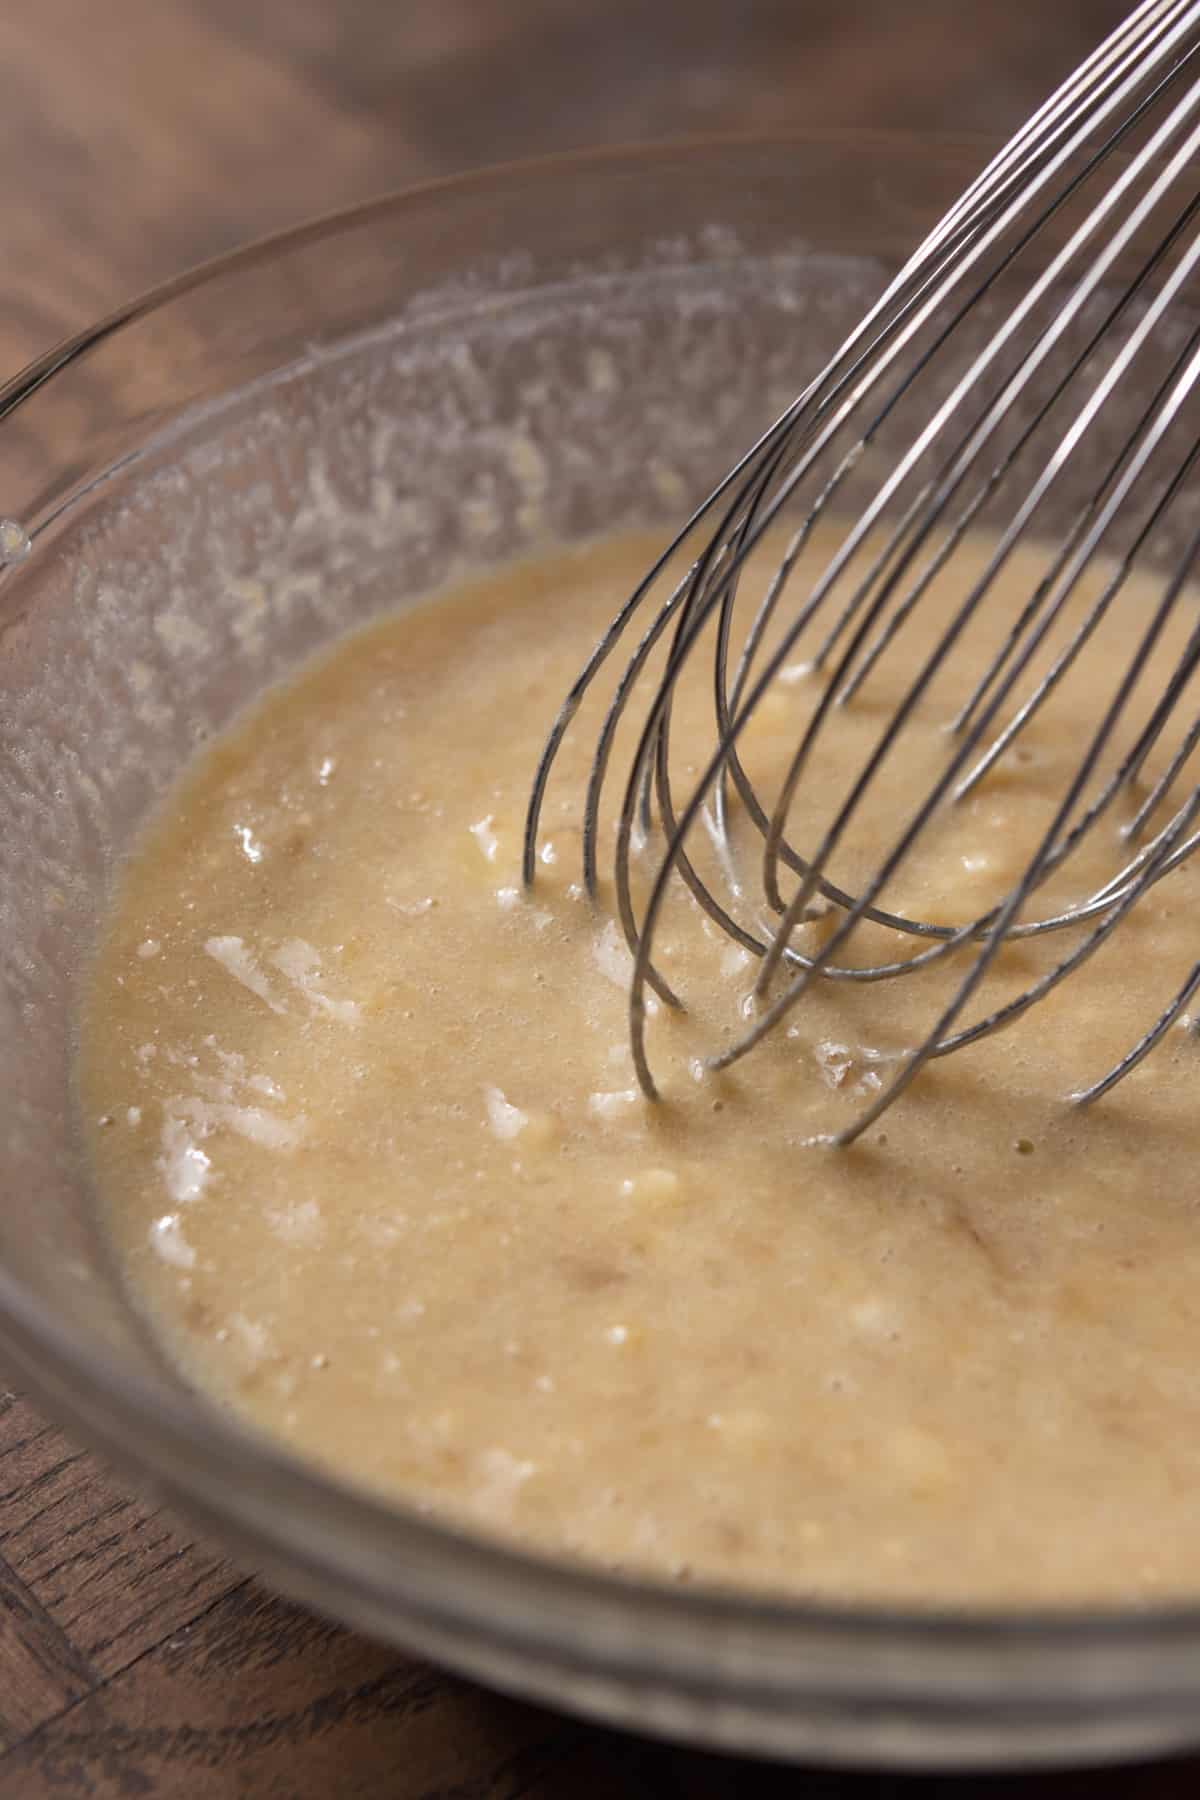 Wet ingredients being whisked in a bowl.